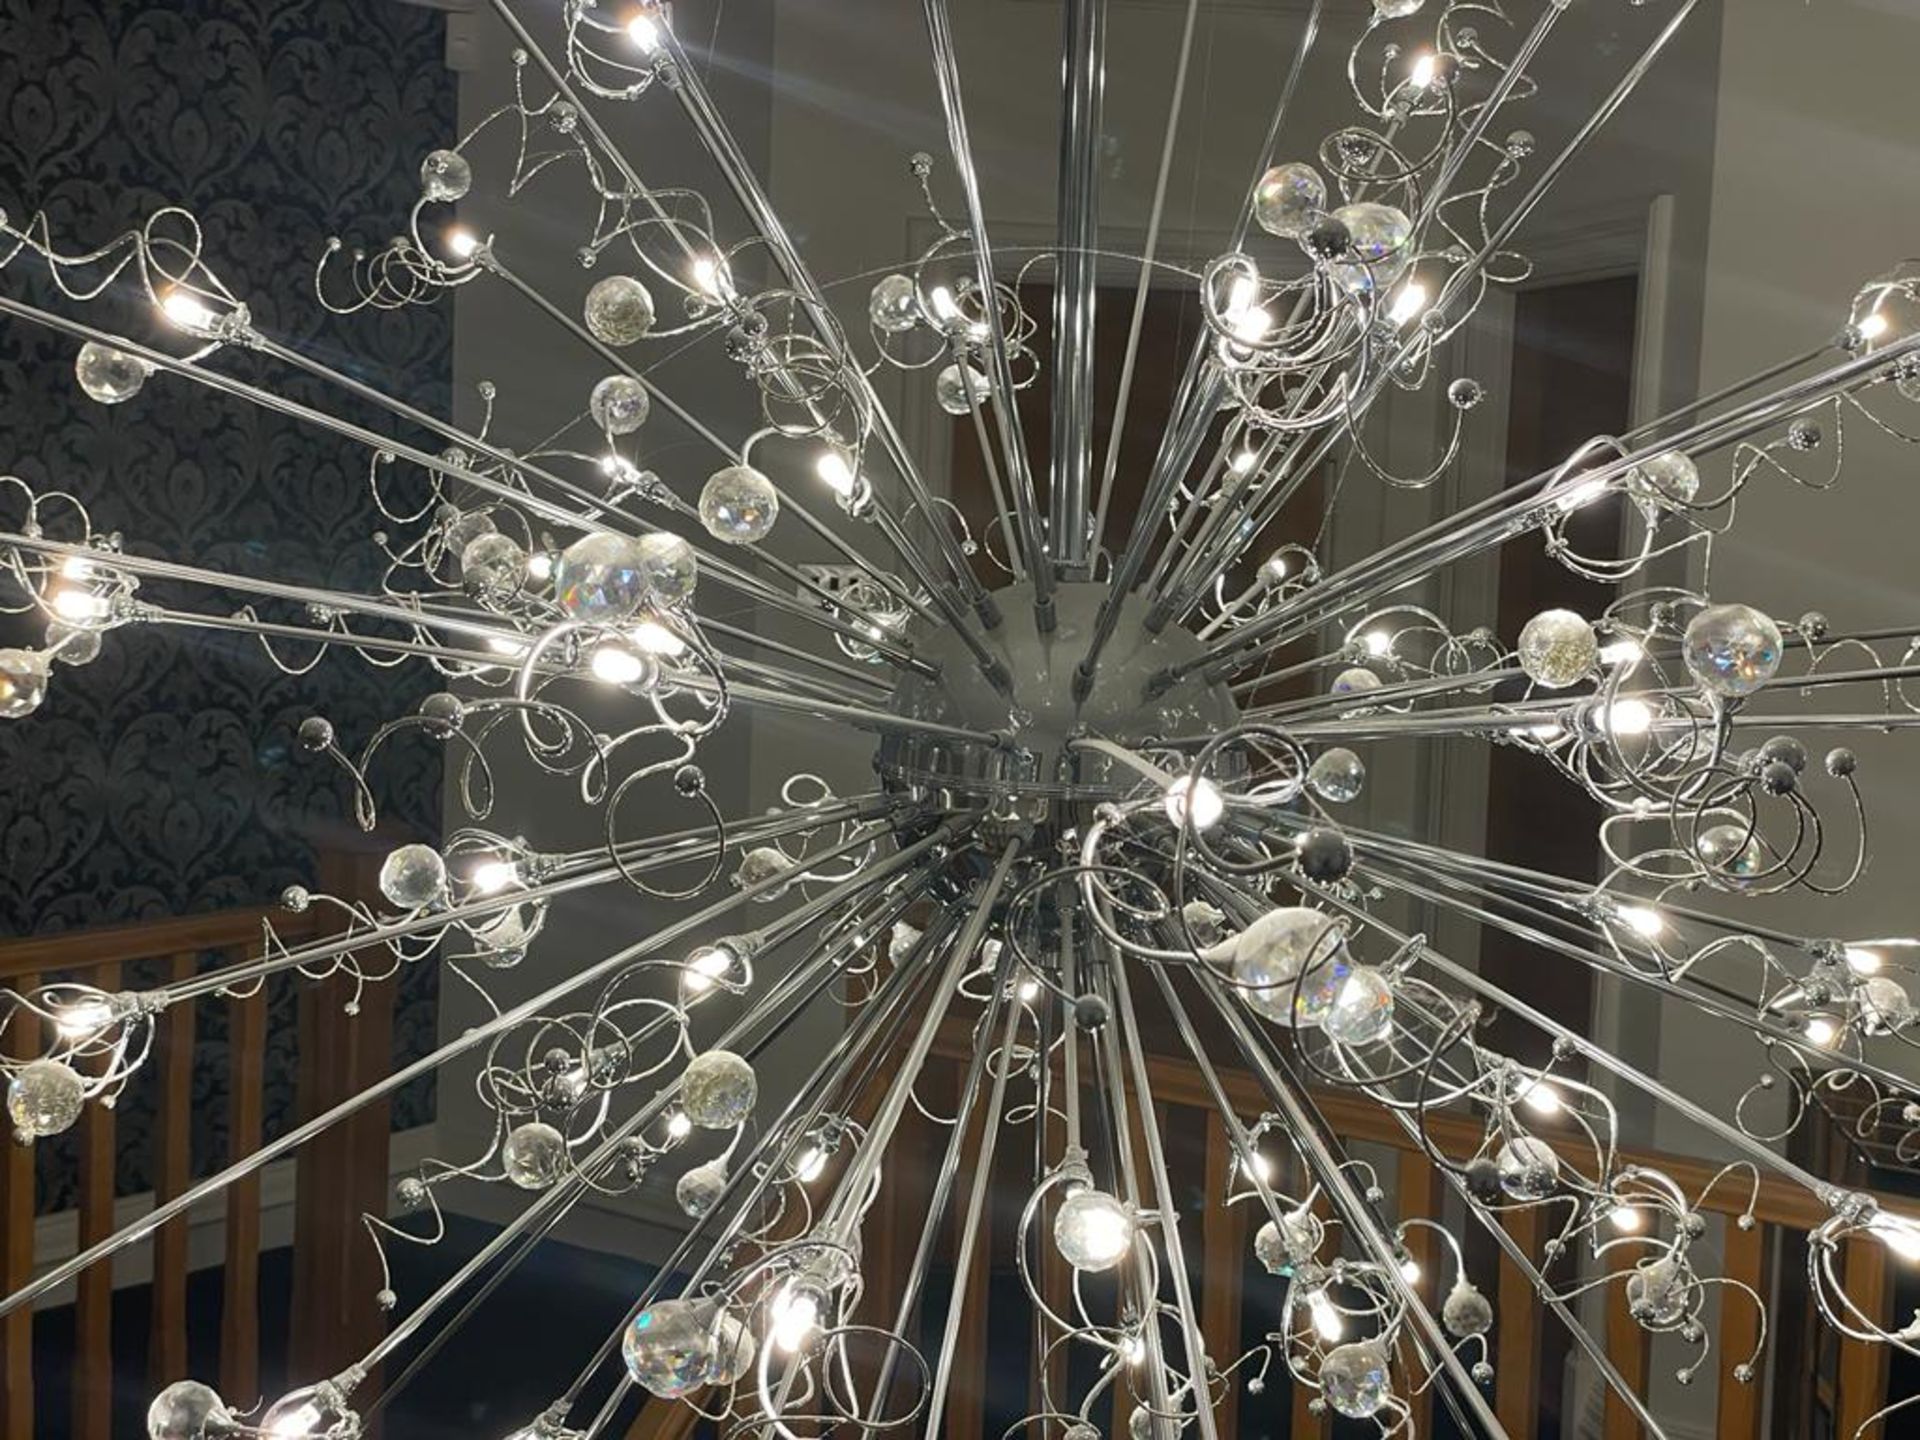 1 x Designer SPUKNIK Suspended CHANDELIER With CHROME Finish and LED LIGHTS - Approx Size 2m x 2m - Image 5 of 11